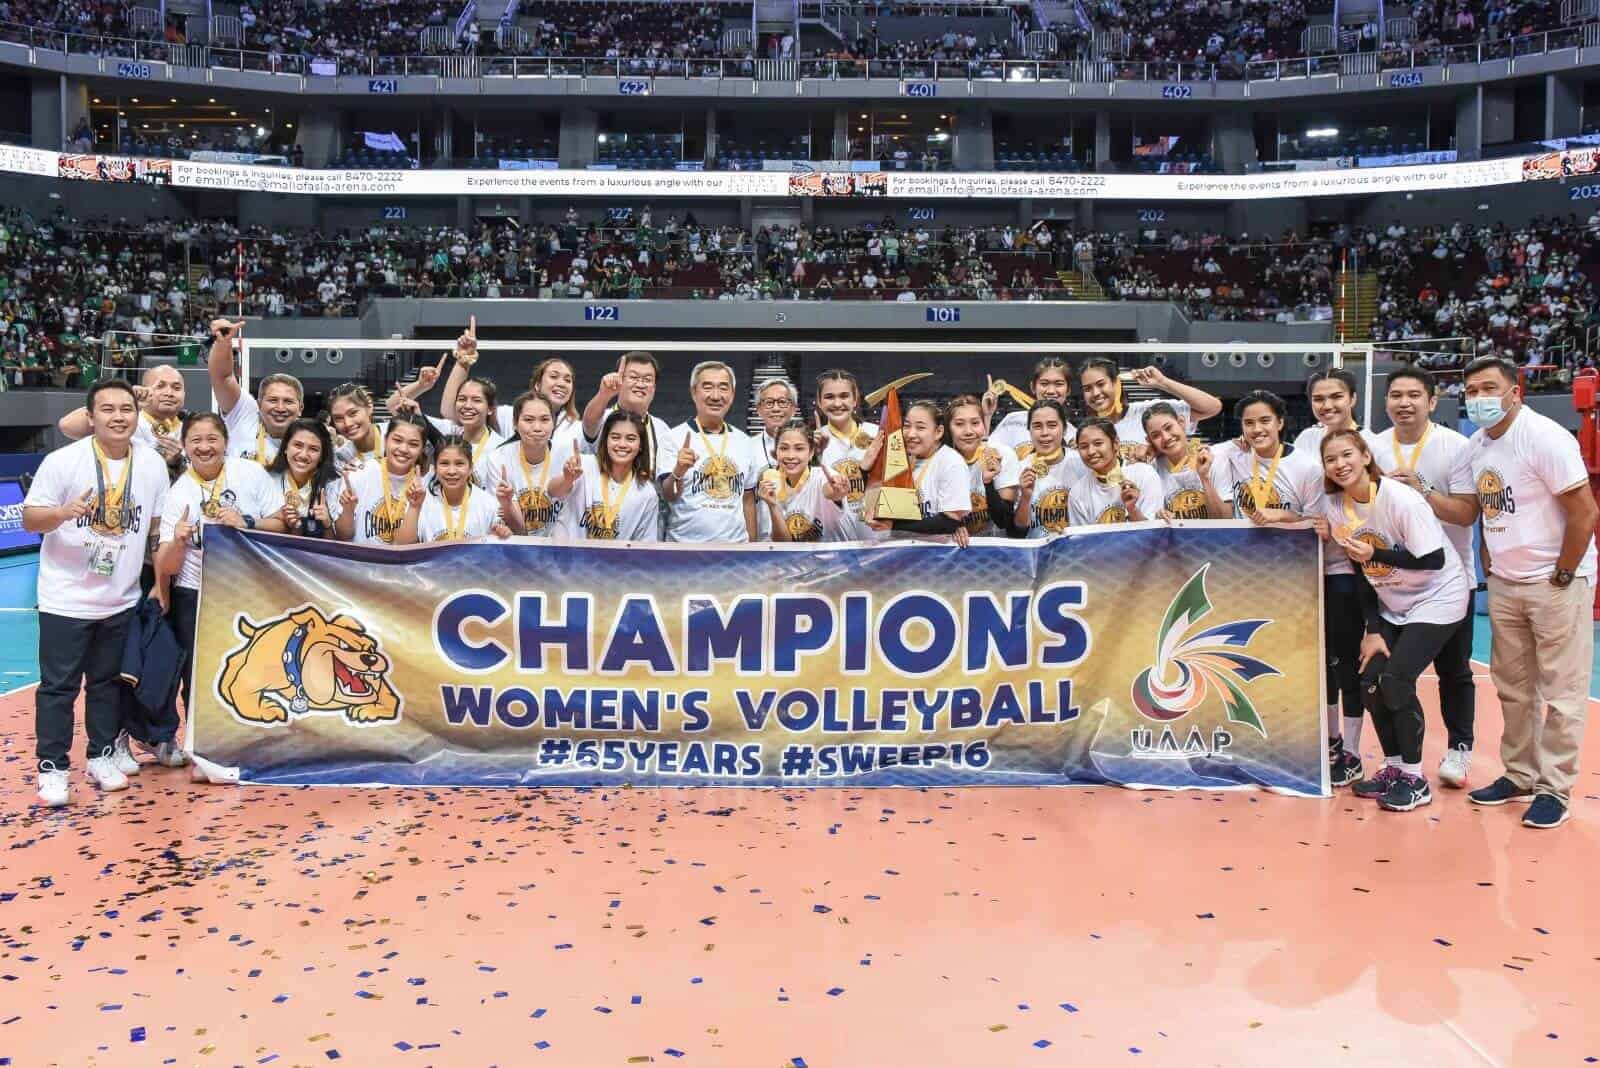 The Philippines women's volleyball team proudly displays the champions banner, concluding a perfect season.